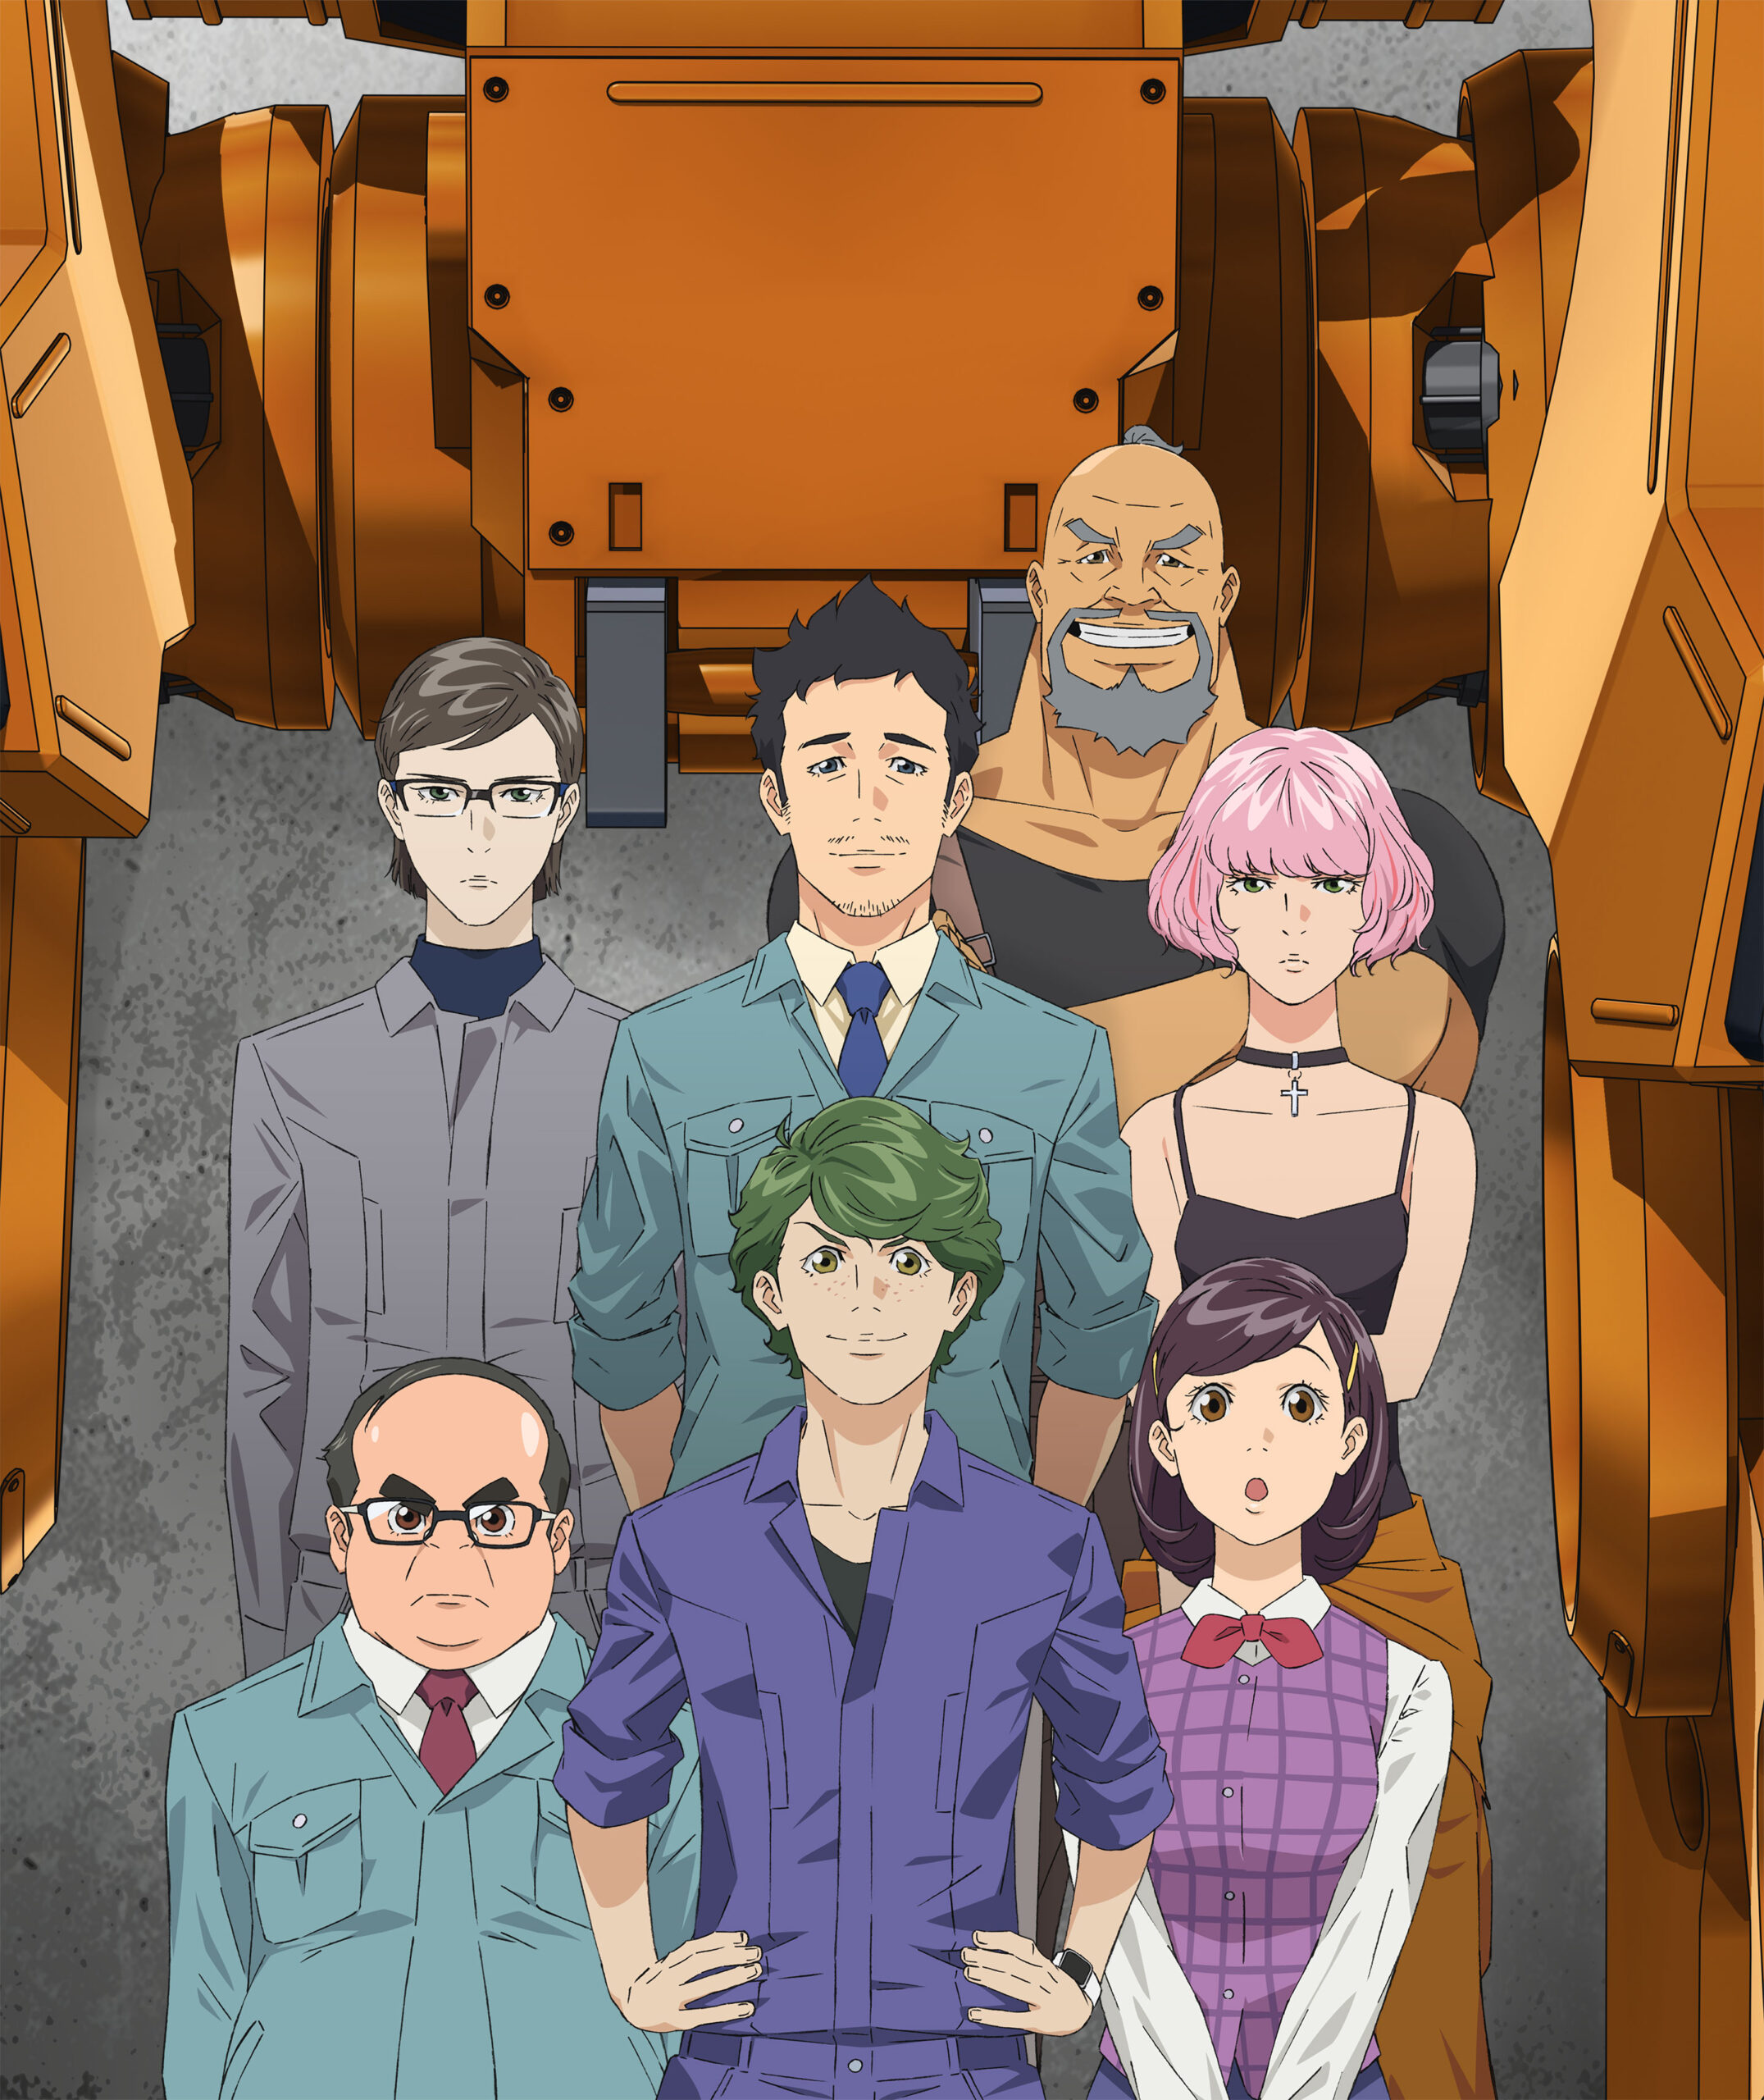 Upcoming Mecha Anime ‘Bullbuster’ Gets October Premiere & More